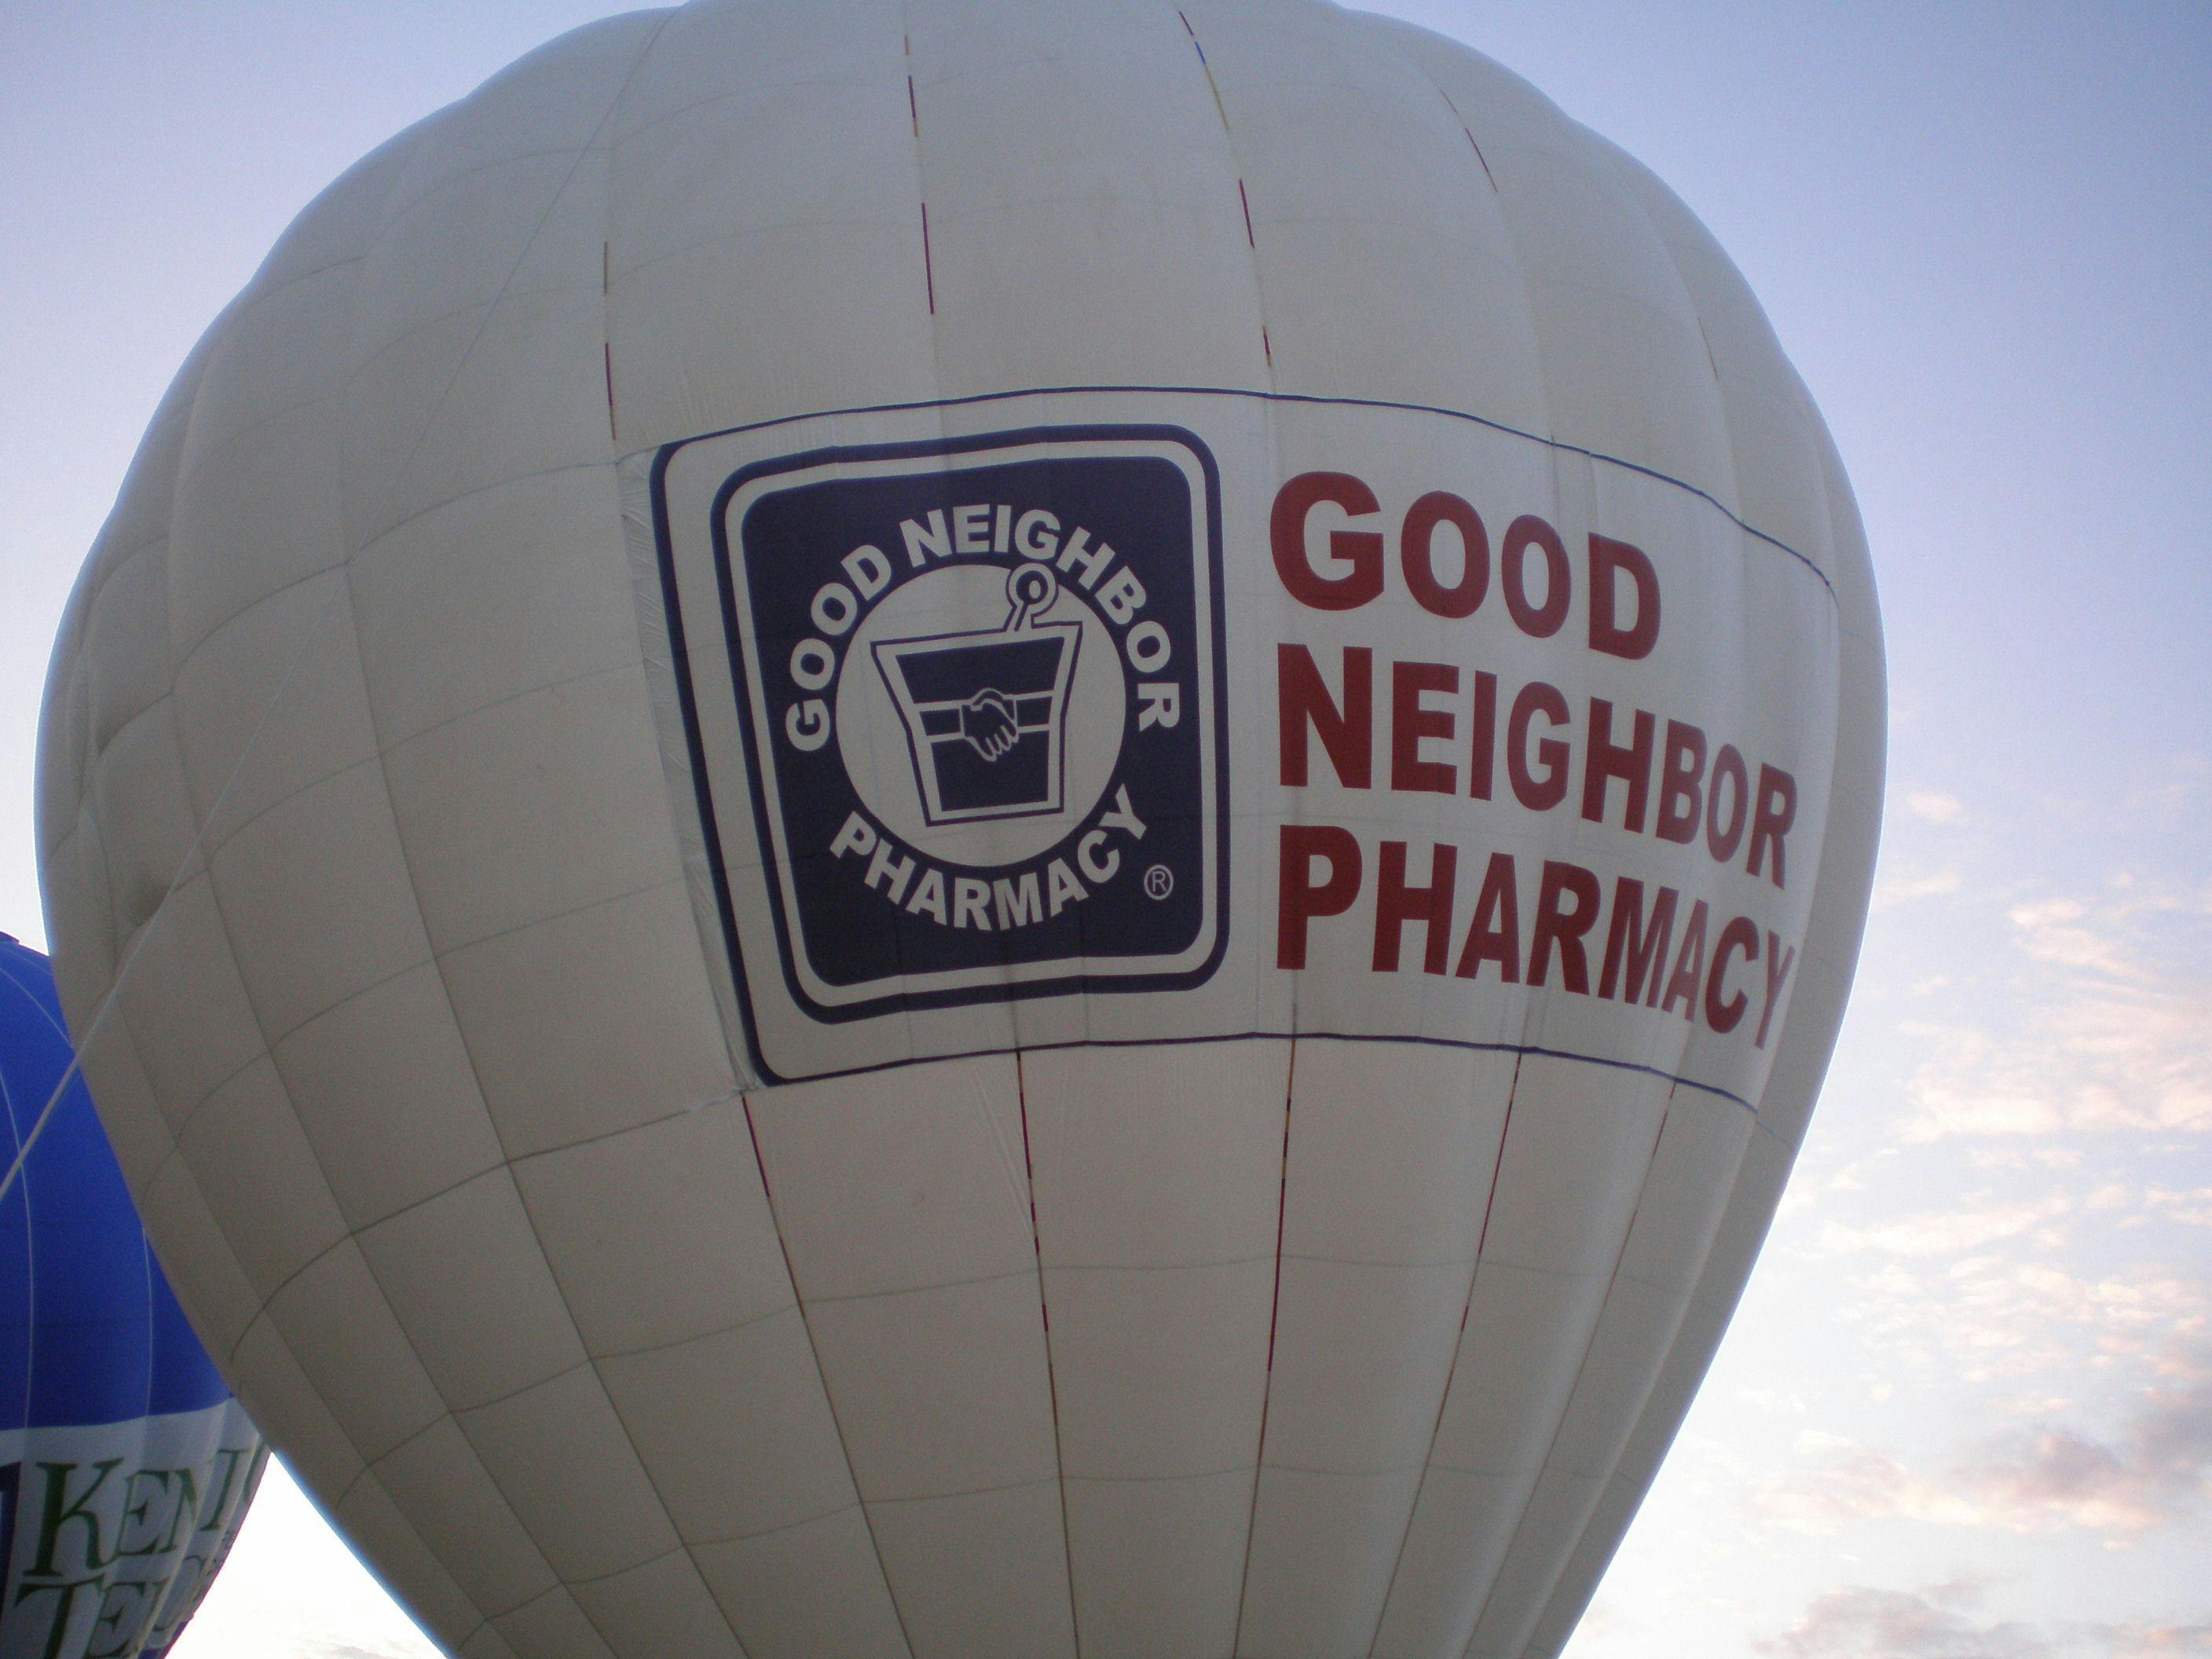 Thinking Back and Looking Forward, Good Neighbor Pharmacy Is Ready for the Next 40 Years